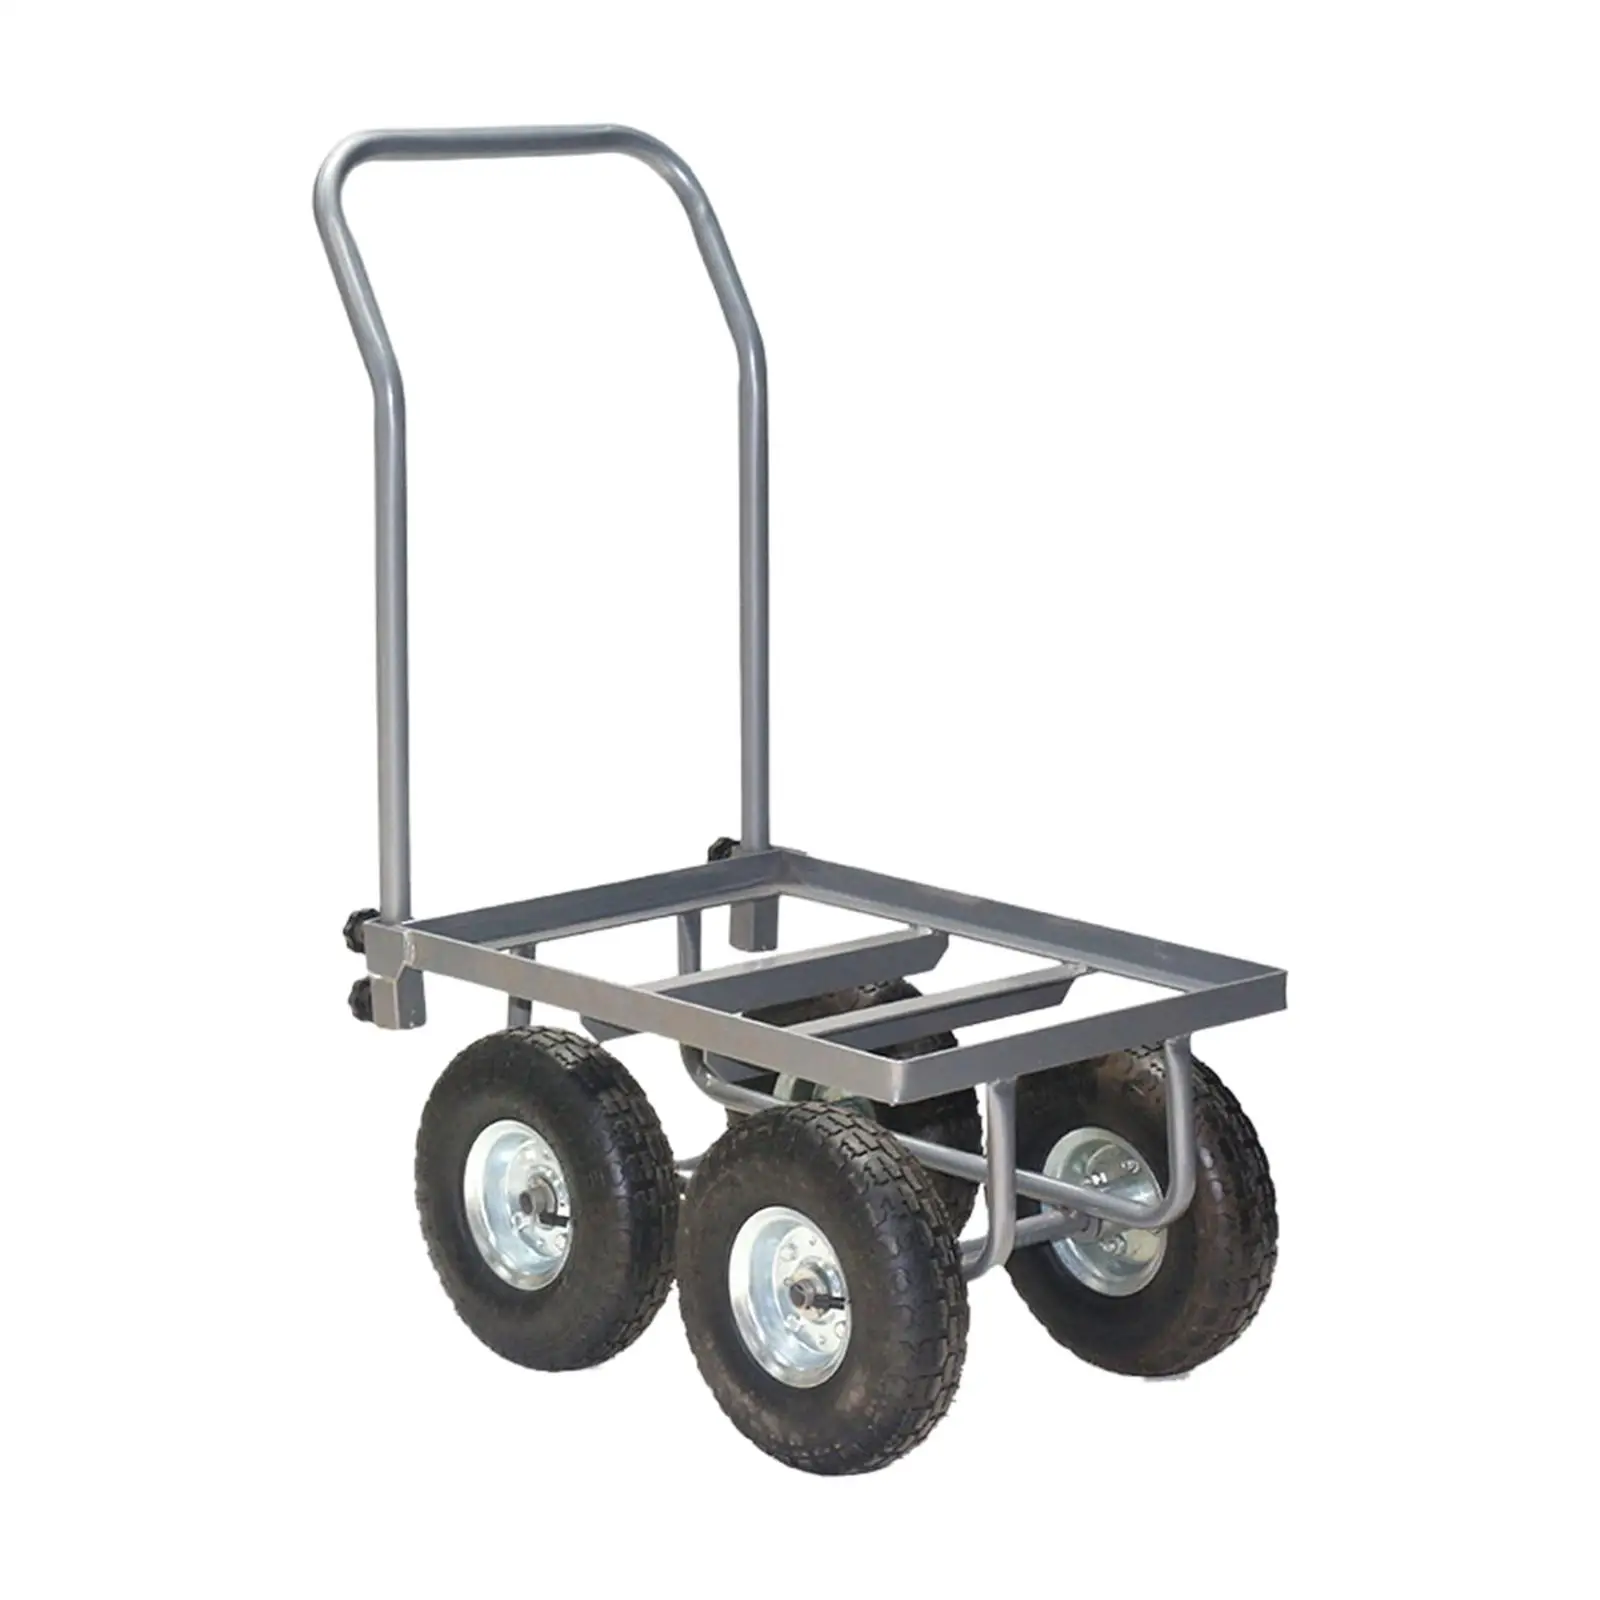 Heavy Duty Platform Trolley, 264lbs Capacity Foldable Hand Truck, Moving Flatbed Cart